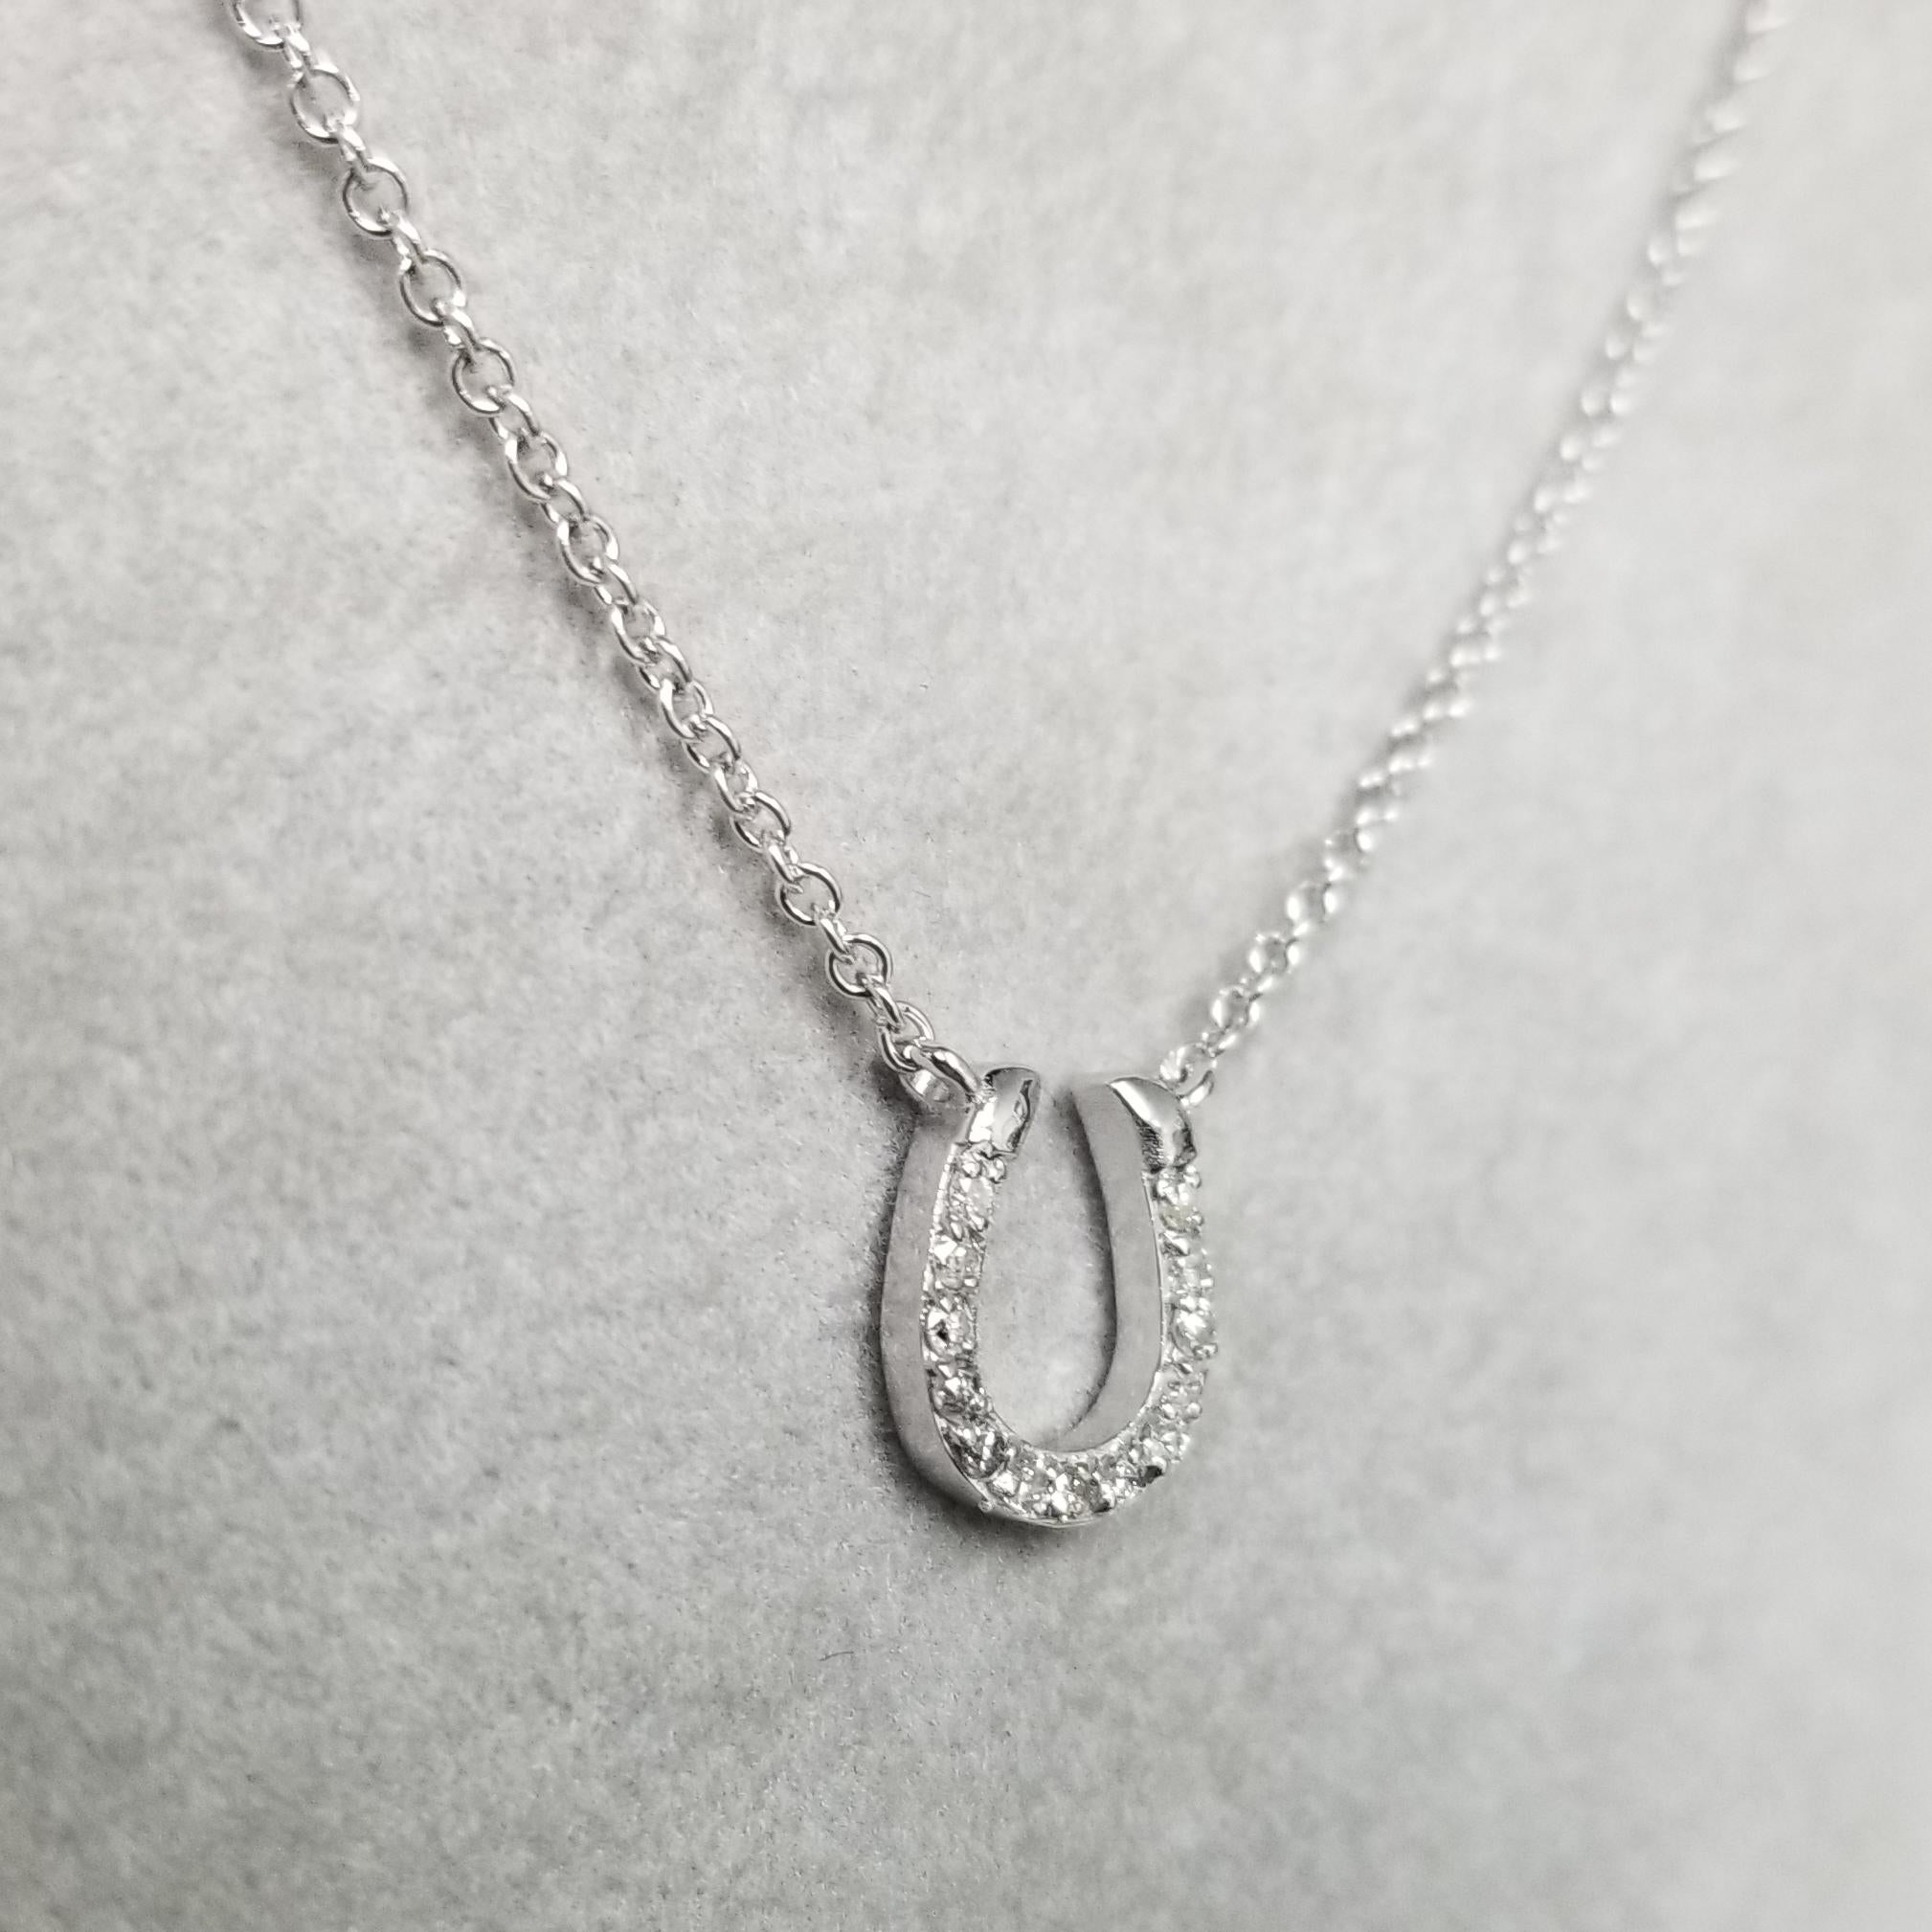 Specifications:
    main stone: ROUND CUT DIAMONDS
    DIAMONDS: 13 PCS
    carat total weight: APPROXIMATELY .20 CTW
    color: G
    clarity: VS
    metal: 14K WHITE GOLD
    type:  PENDANT
    LENGTH: 16INCHES
